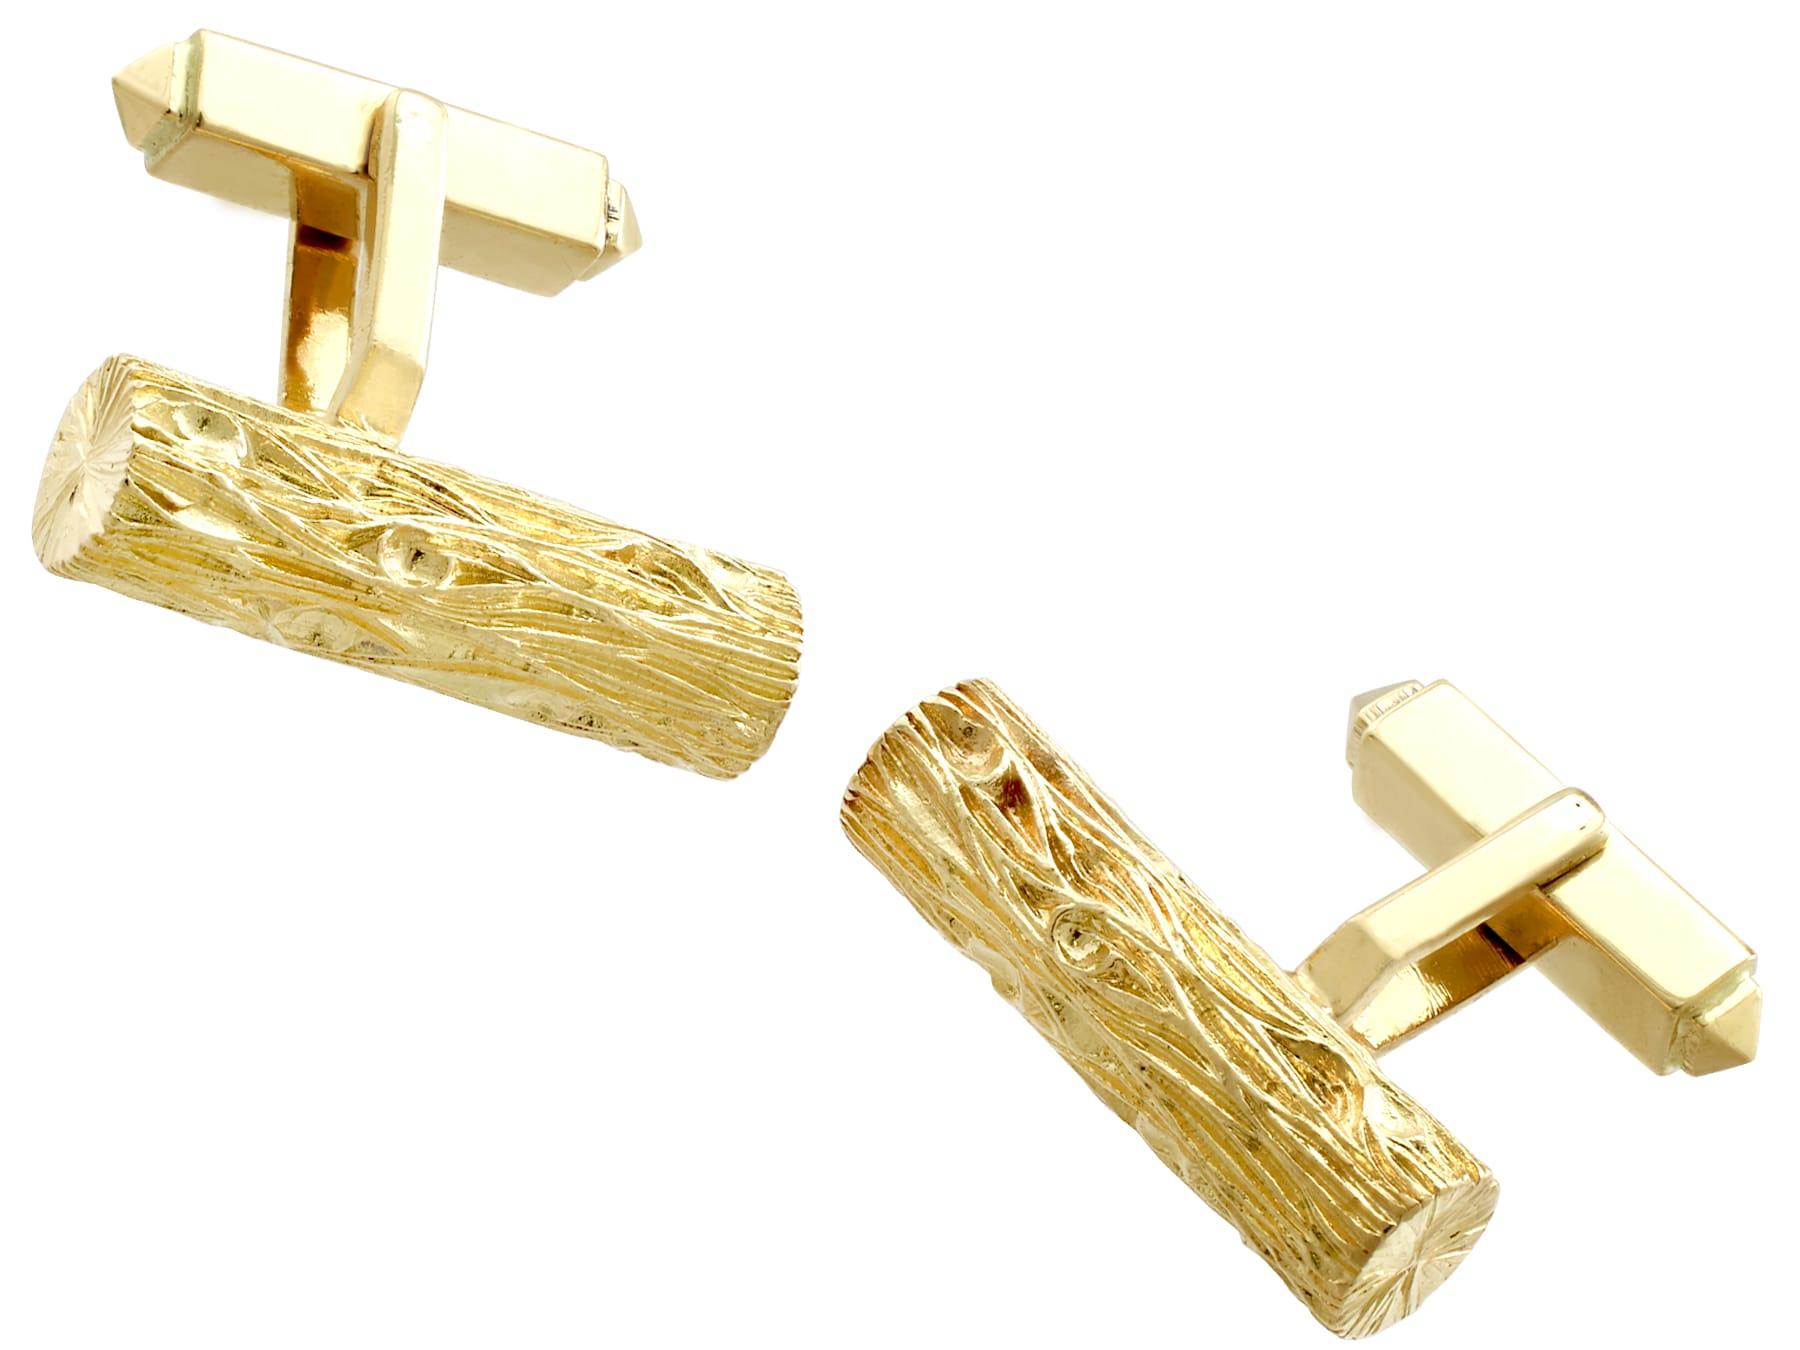 An impressive pair of vintage 18 karat yellow gold gent's cufflinks; part of our diverse vintage jewelry collections.

These fine and impressive vintage gold cufflinks have been crafted in 18k yellow gold.

The anterior links have a cylindrical